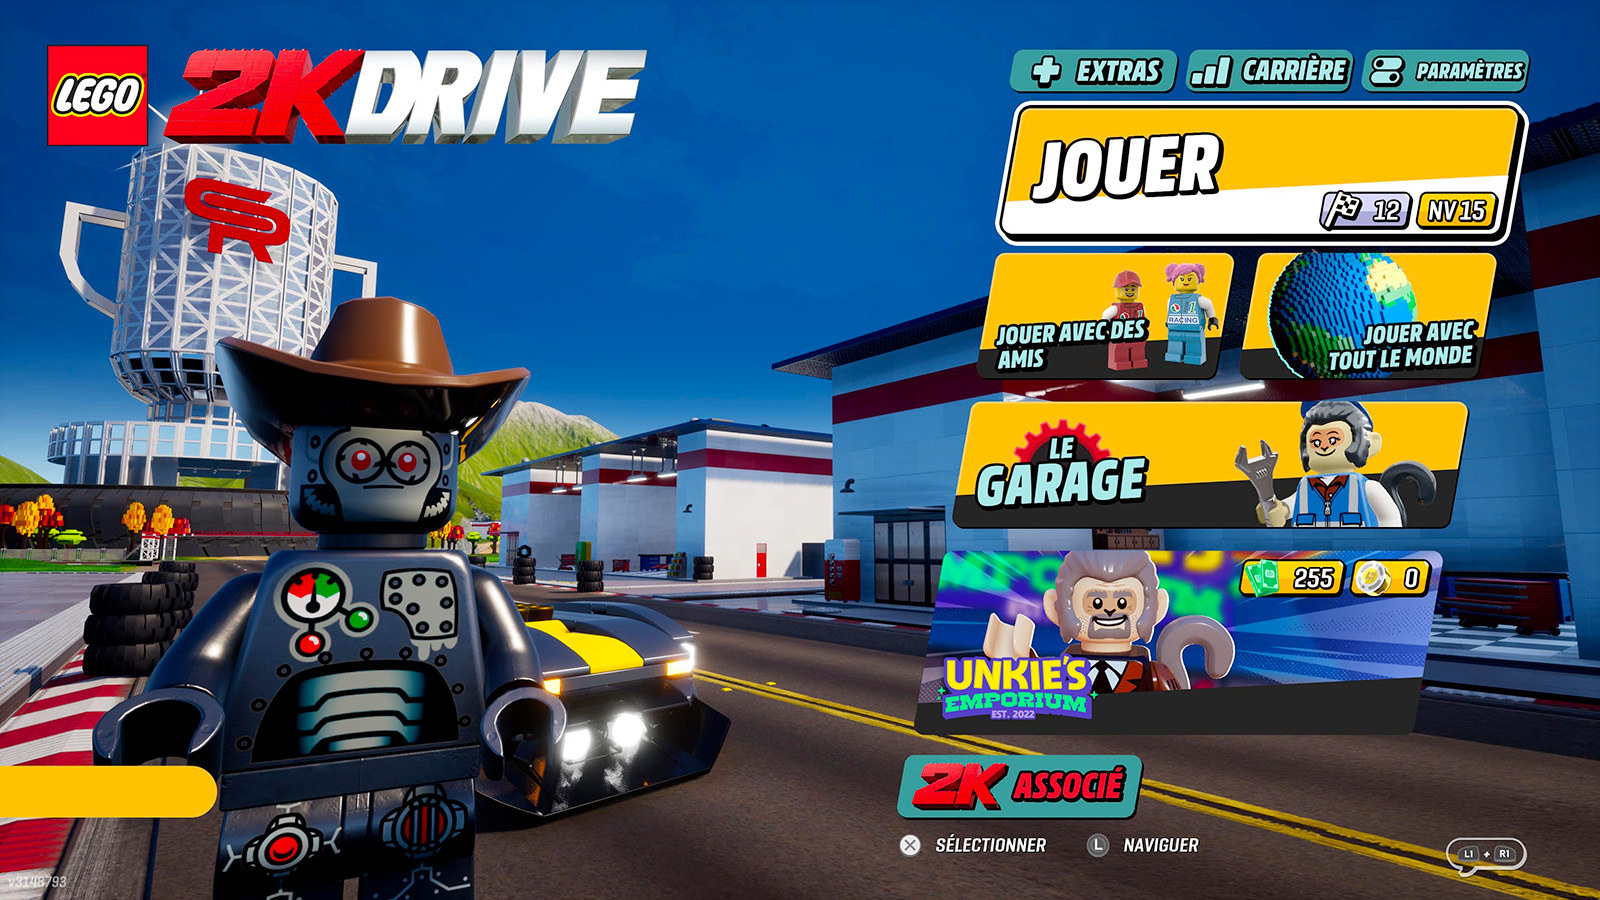 ▻ LEGO 2K Drive: not the game of the year, but it's still fun - HOTH BRICKS